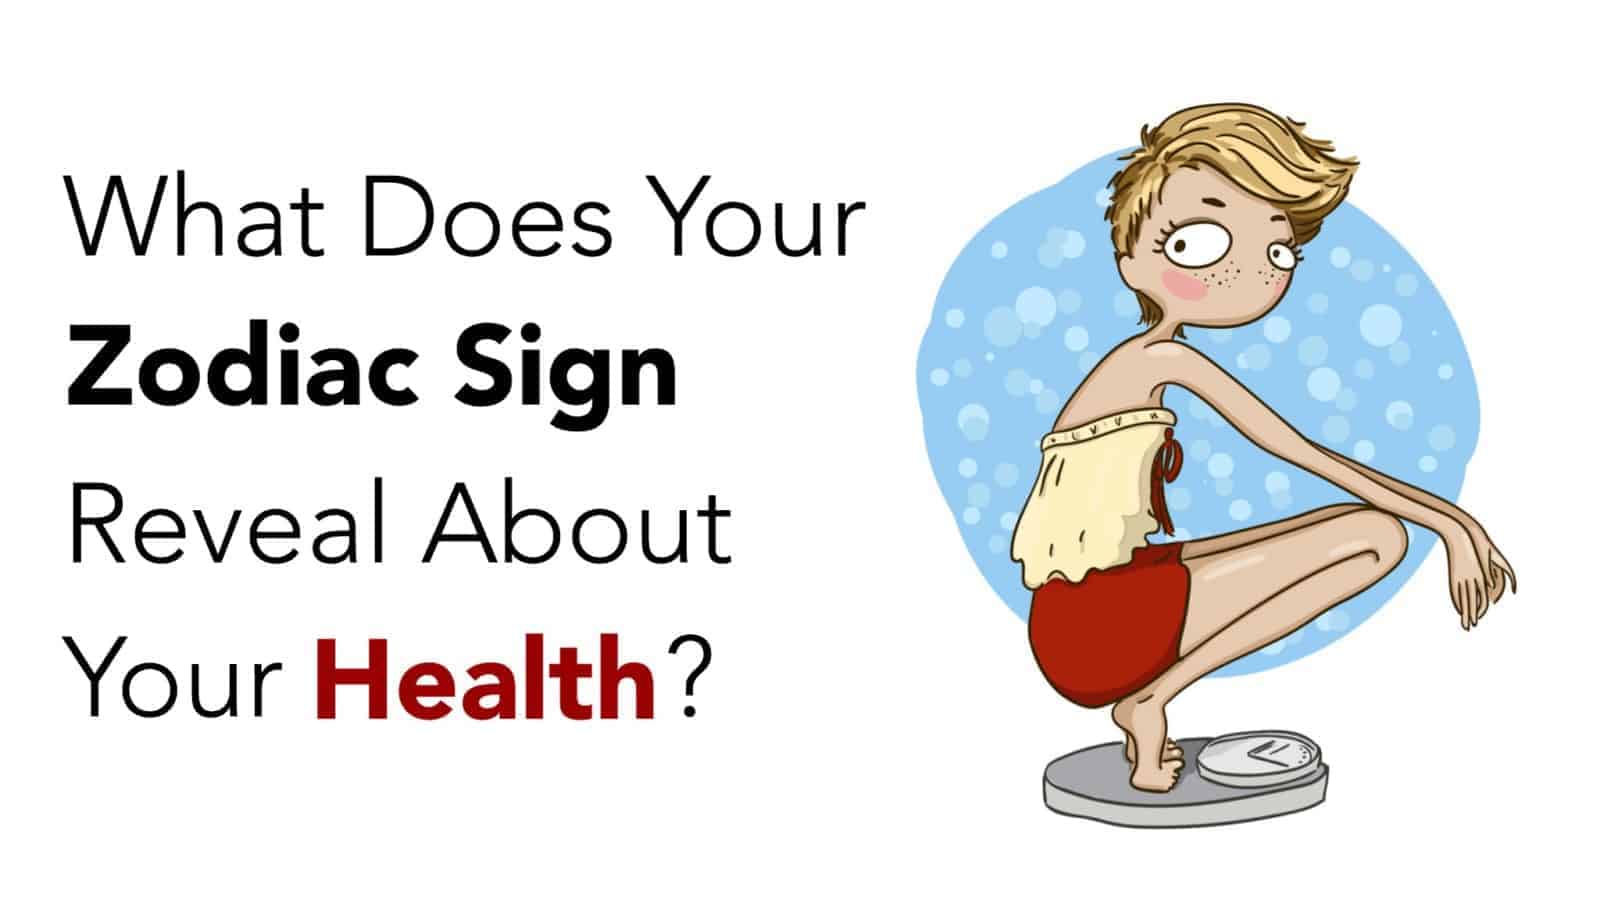 What Does Your Zodiac Sign Reveal About Your Health?